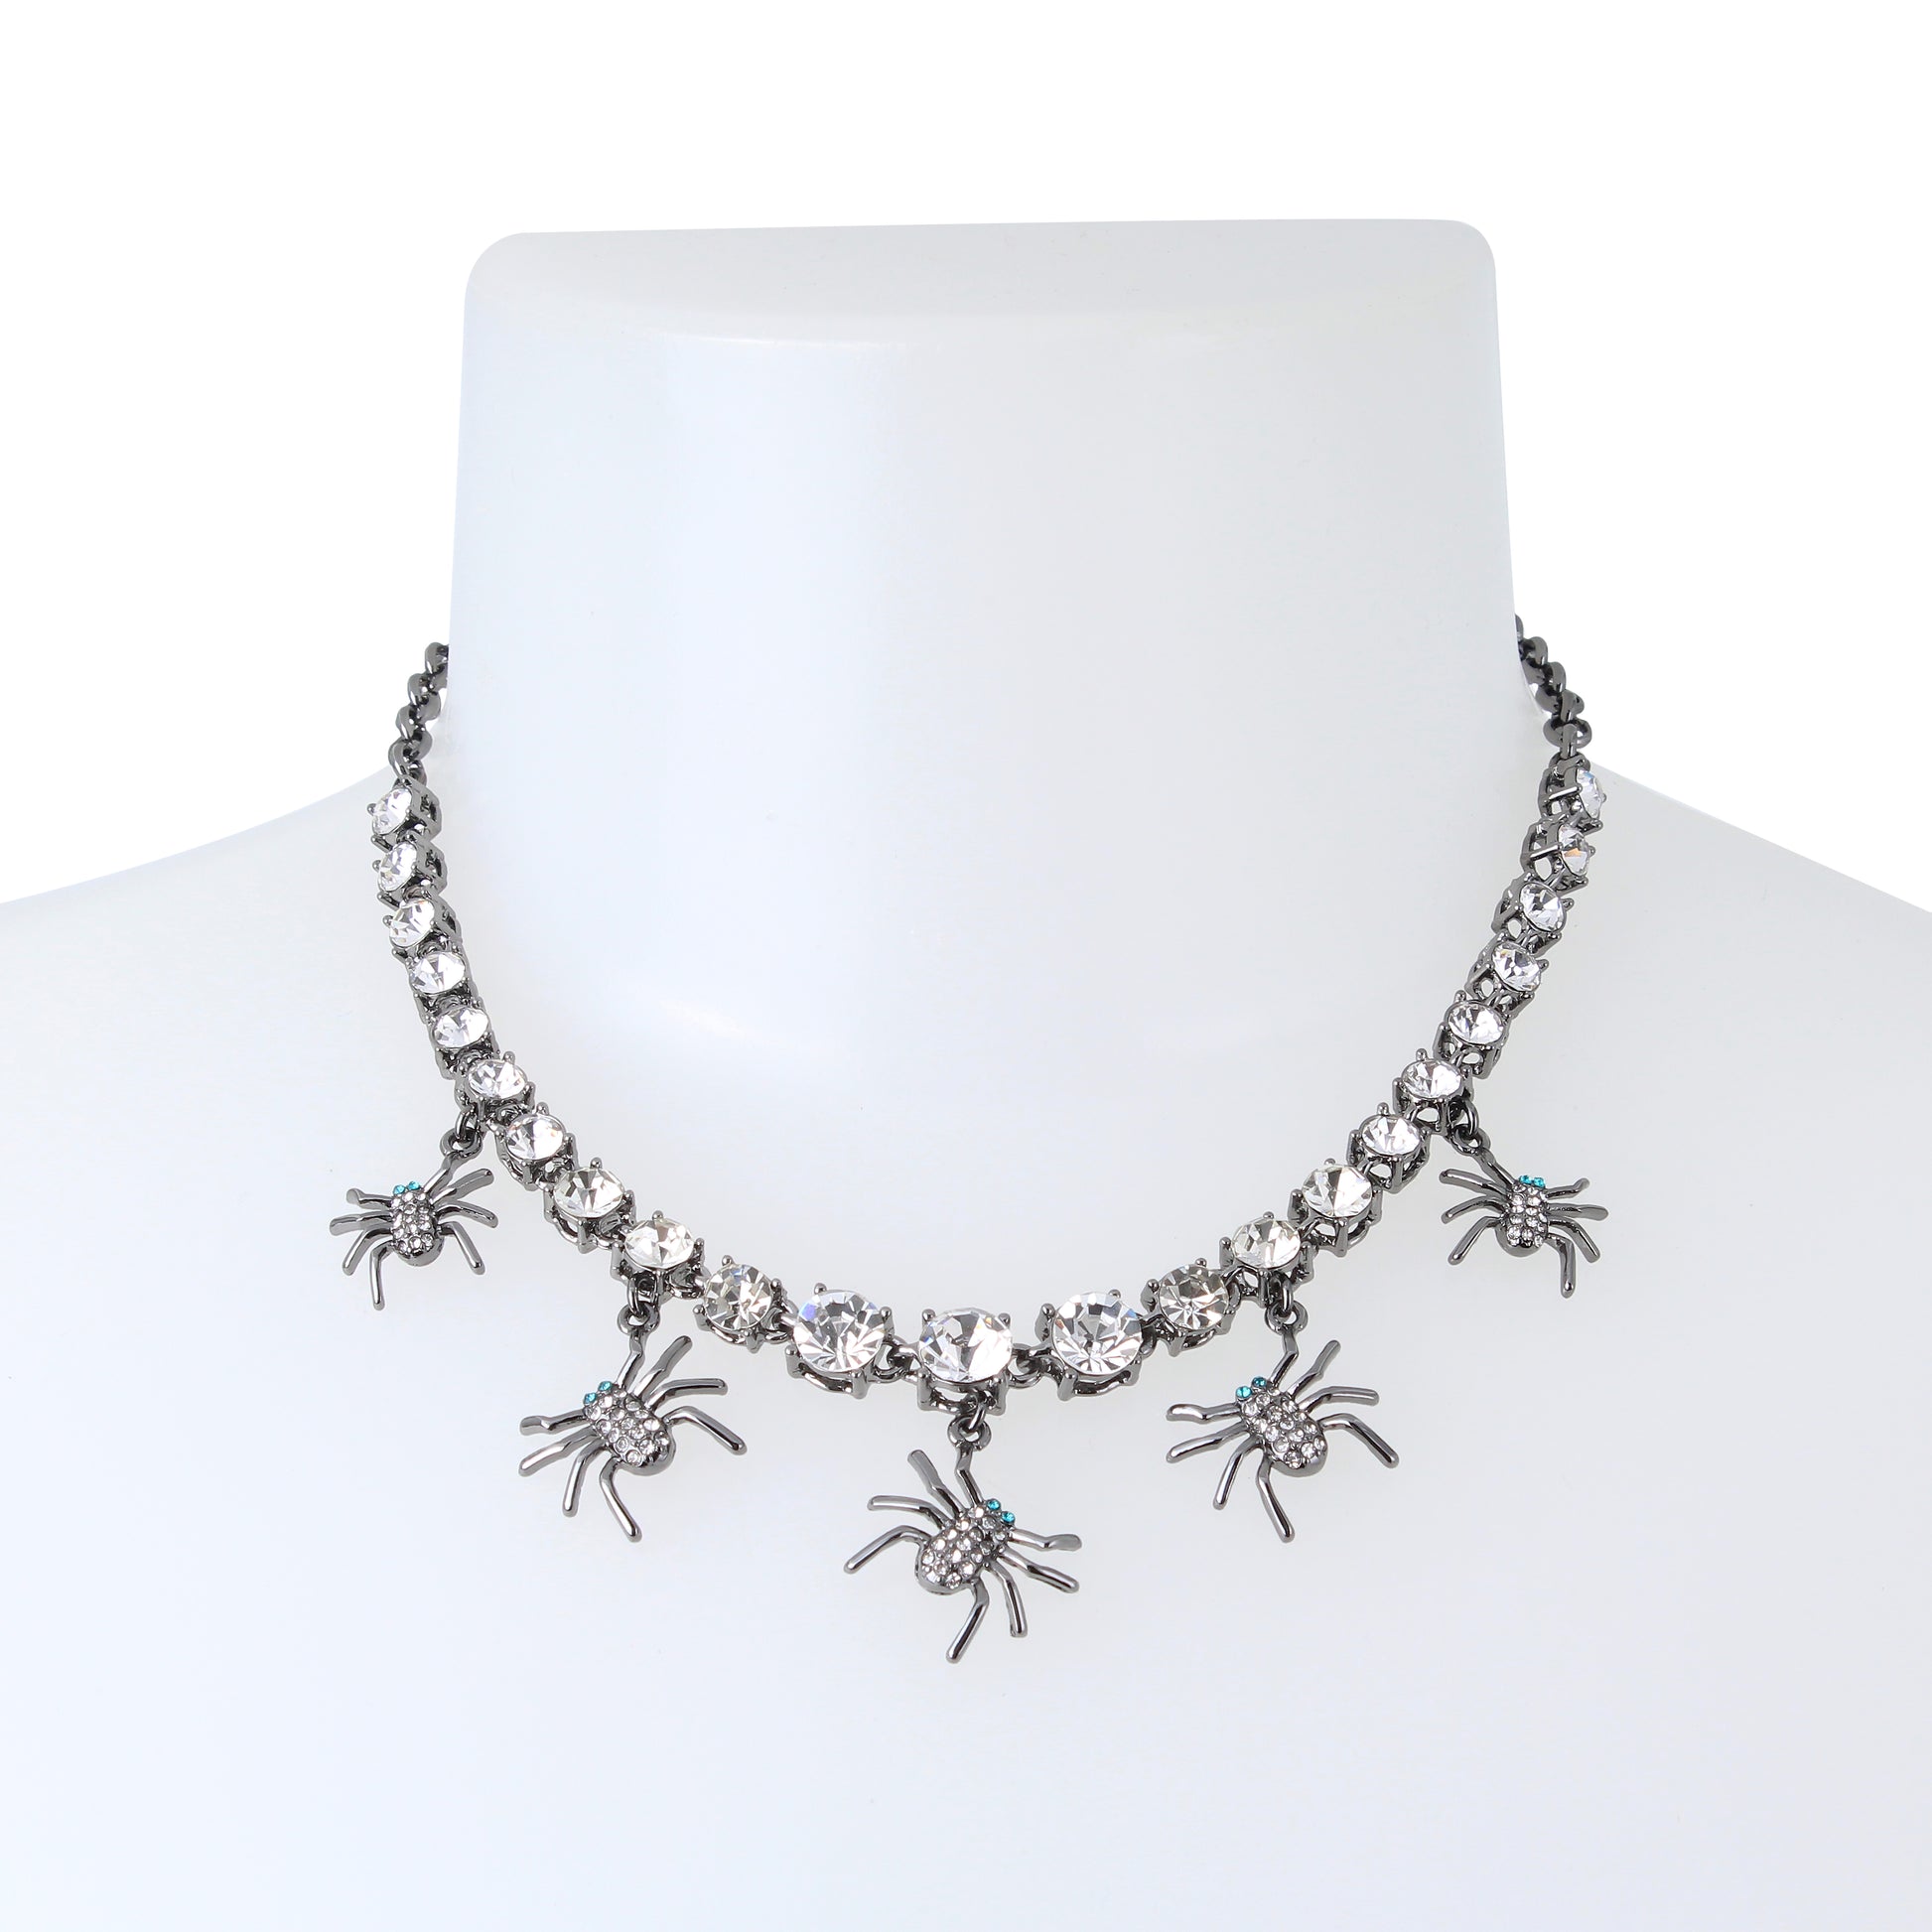 Betsey's 80th Birthday Spider Tennis Necklace